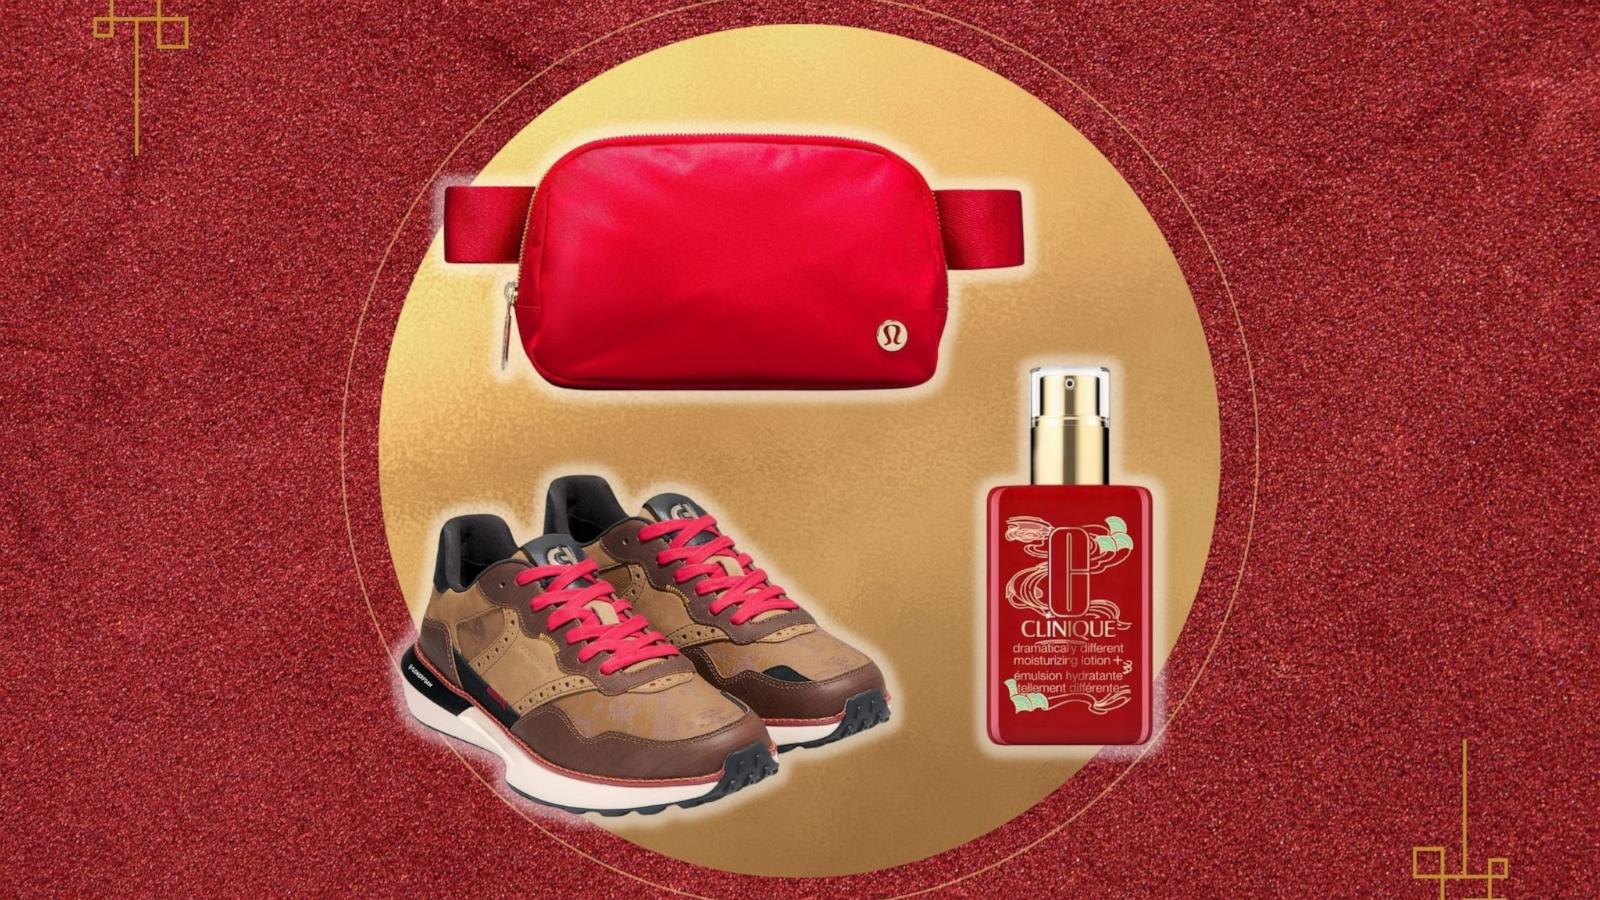 Lululemon drops Lunar New Year collection, top picks to choose